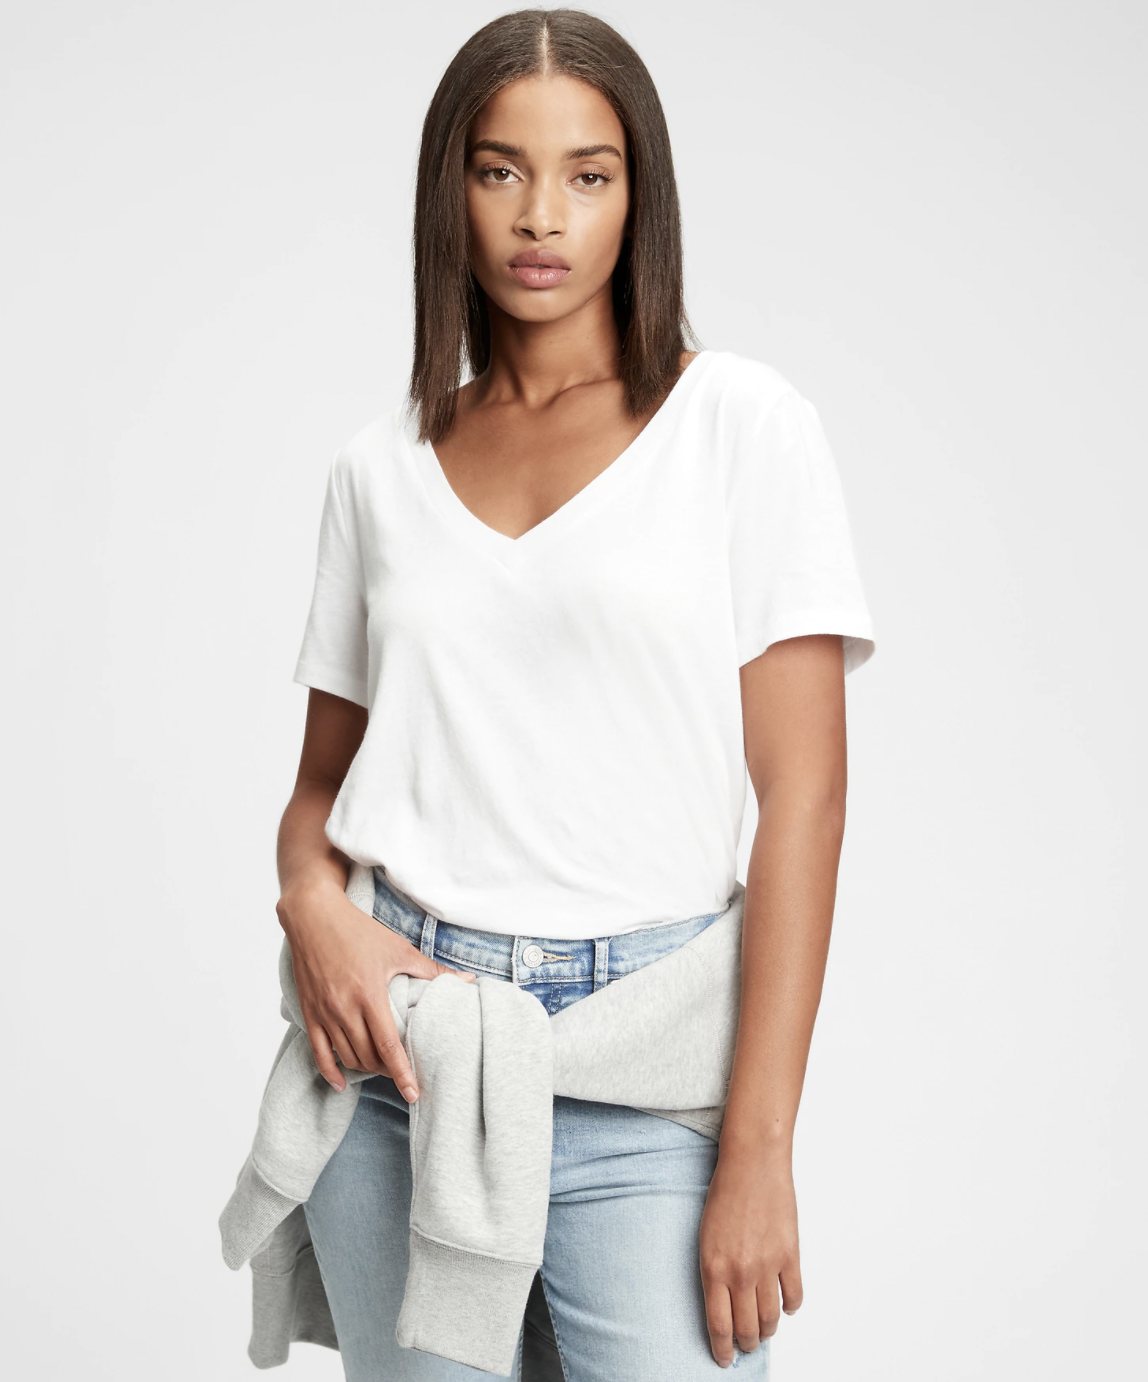 Gap: Up to 50% Off